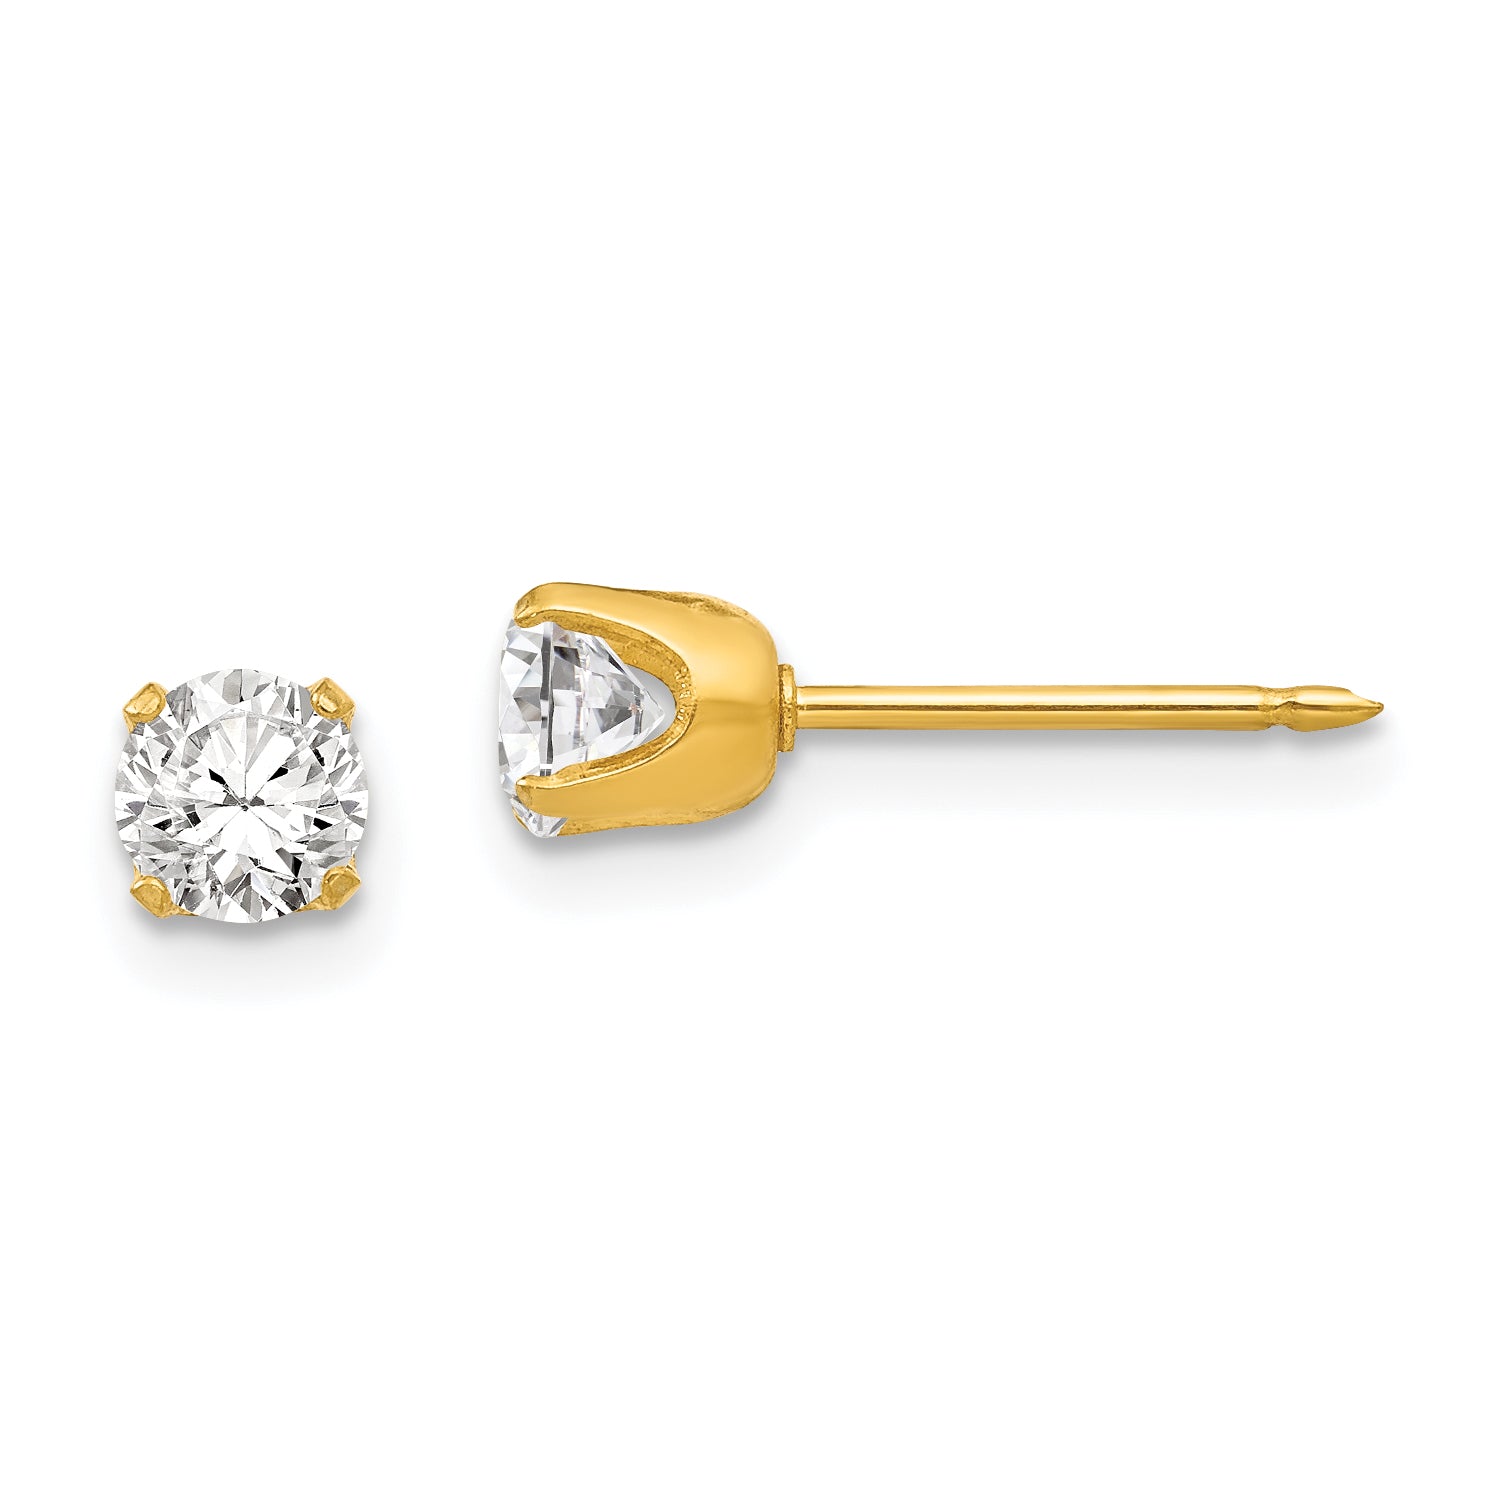 Inverness 24k Plated Stainless Steel 5mm CZ Post Earrings